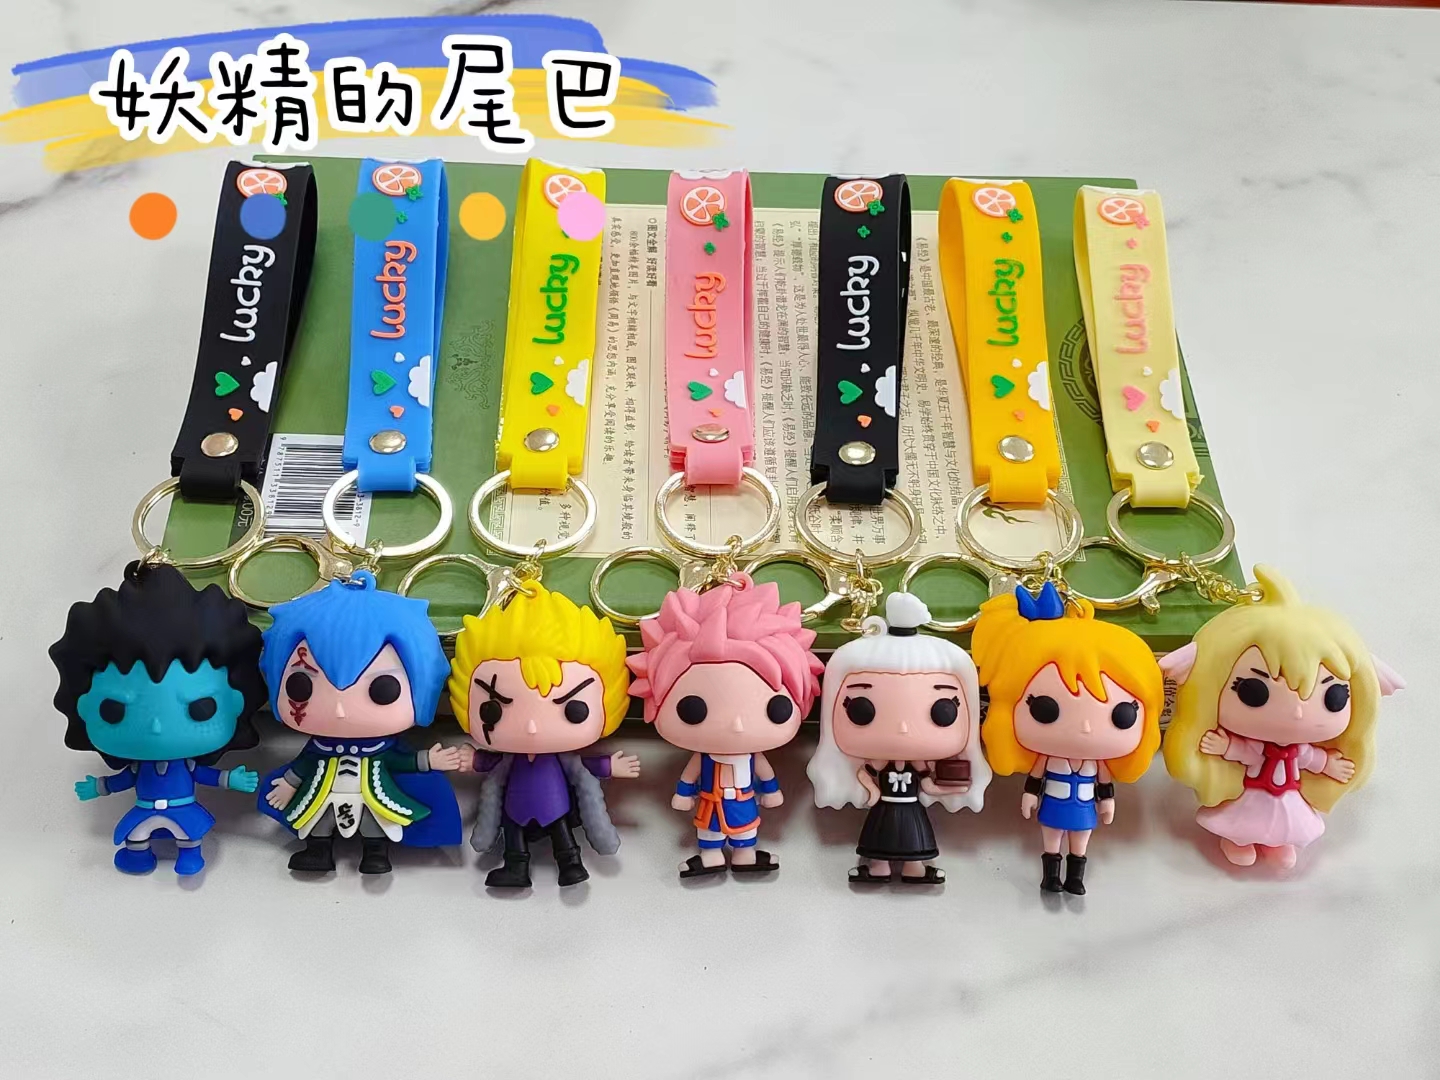 fairy tail anime figure keychain price for 1 pcs